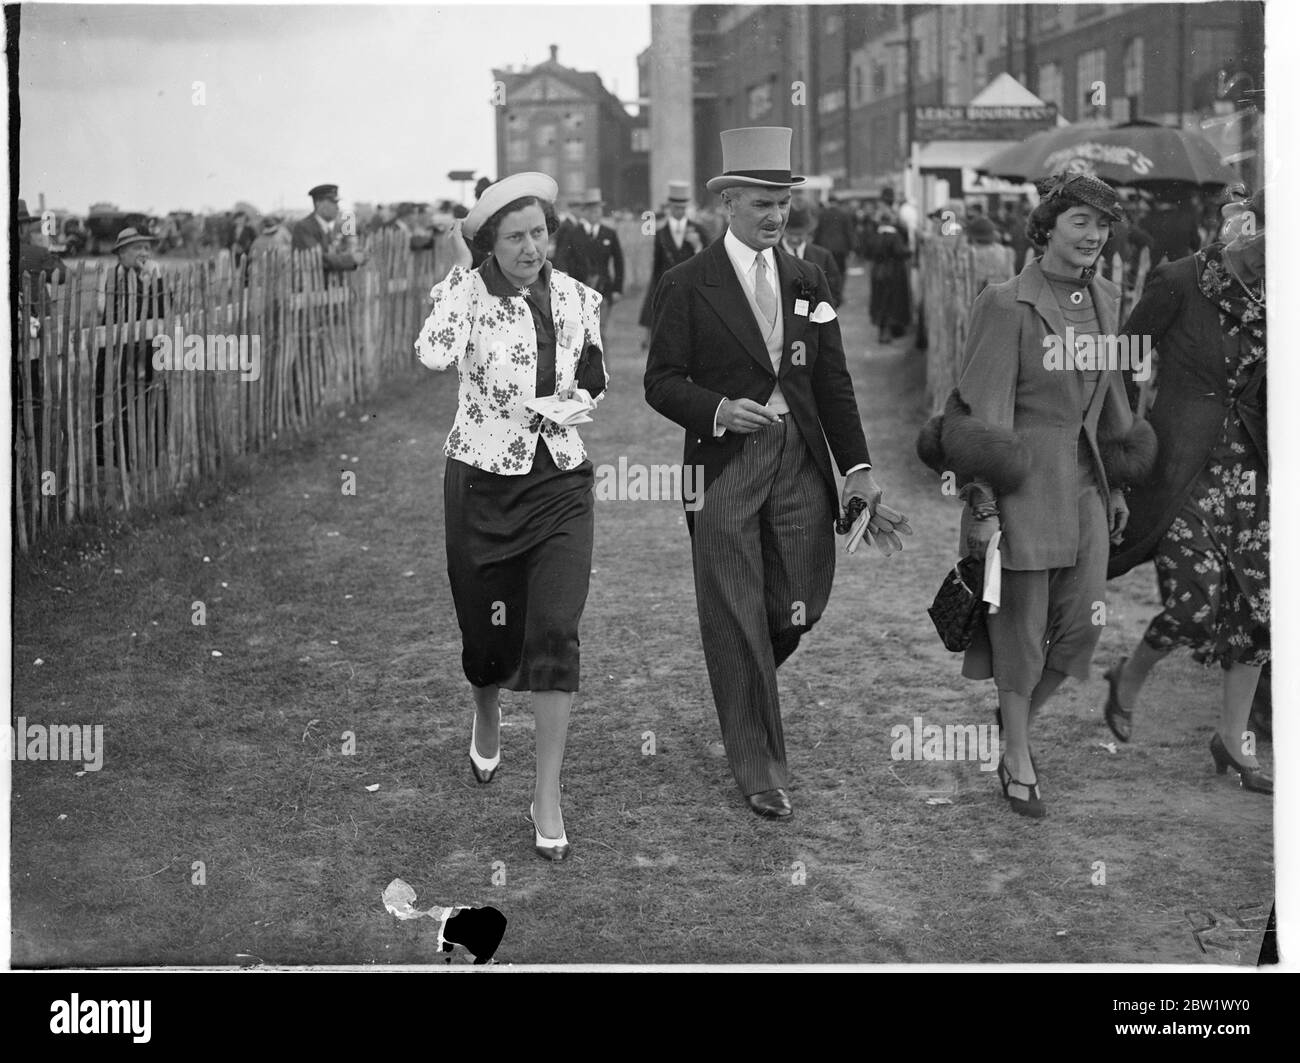 'Spot' at Epsom on 'ladies Day'. Spots and flowers worn effectively by woman racegoer at Epsom on Oaks day. 4 June 1937 Stock Photo